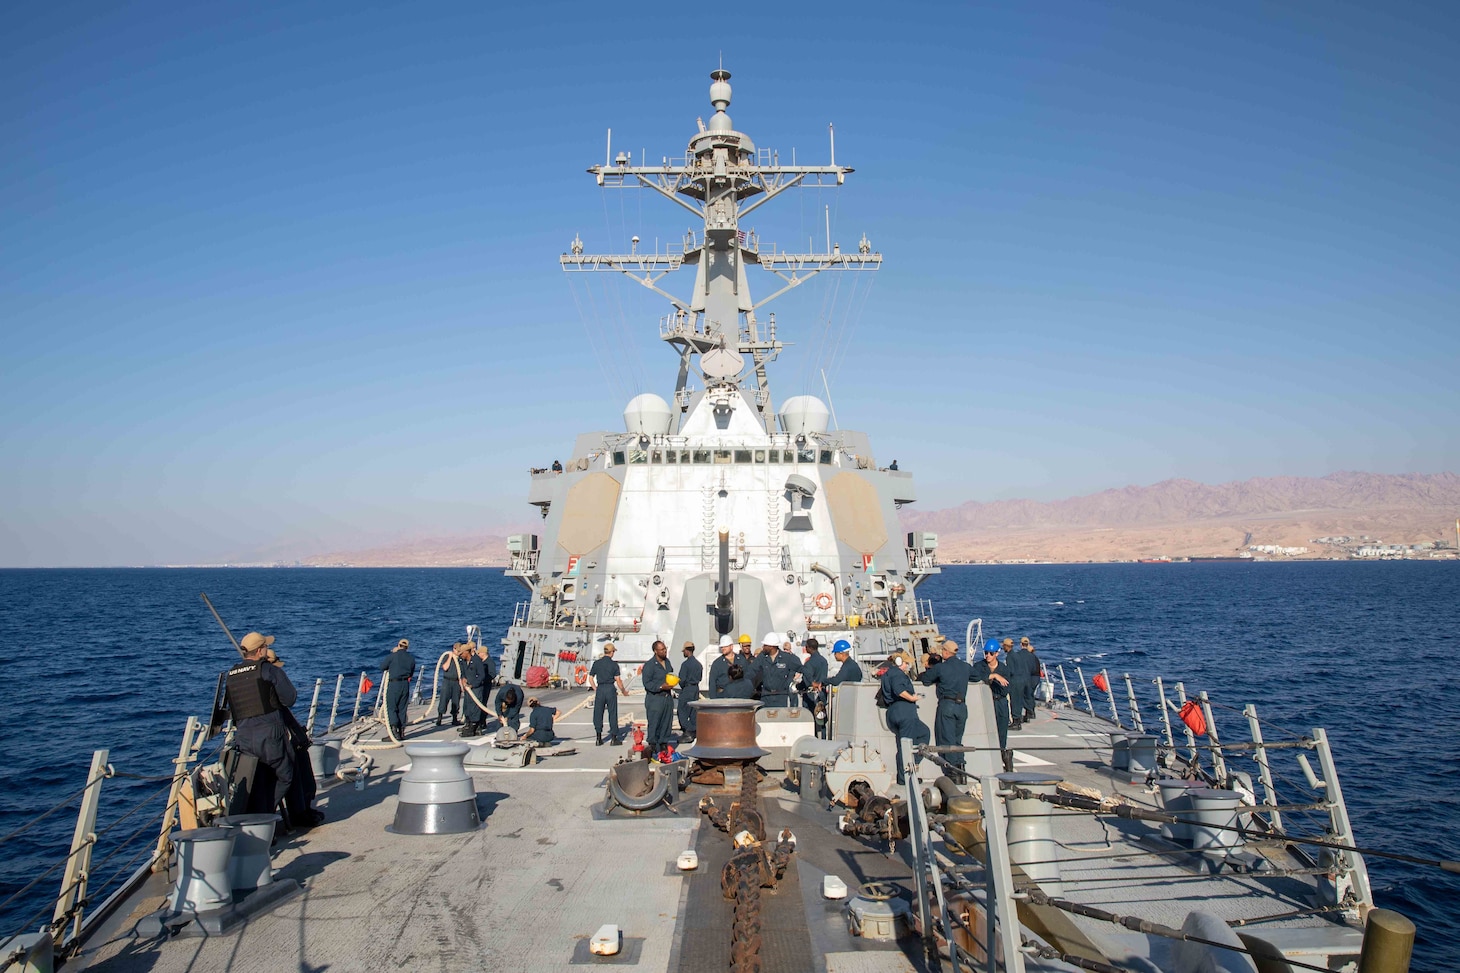 Guided-missile destroyer USS Nitze (DDG 94) sails in the Red Sea, Nov. 17. Nitze is deployed to the U.S. 5th Fleet area of operations to help ensure maritime security and stability in the Middle East region.